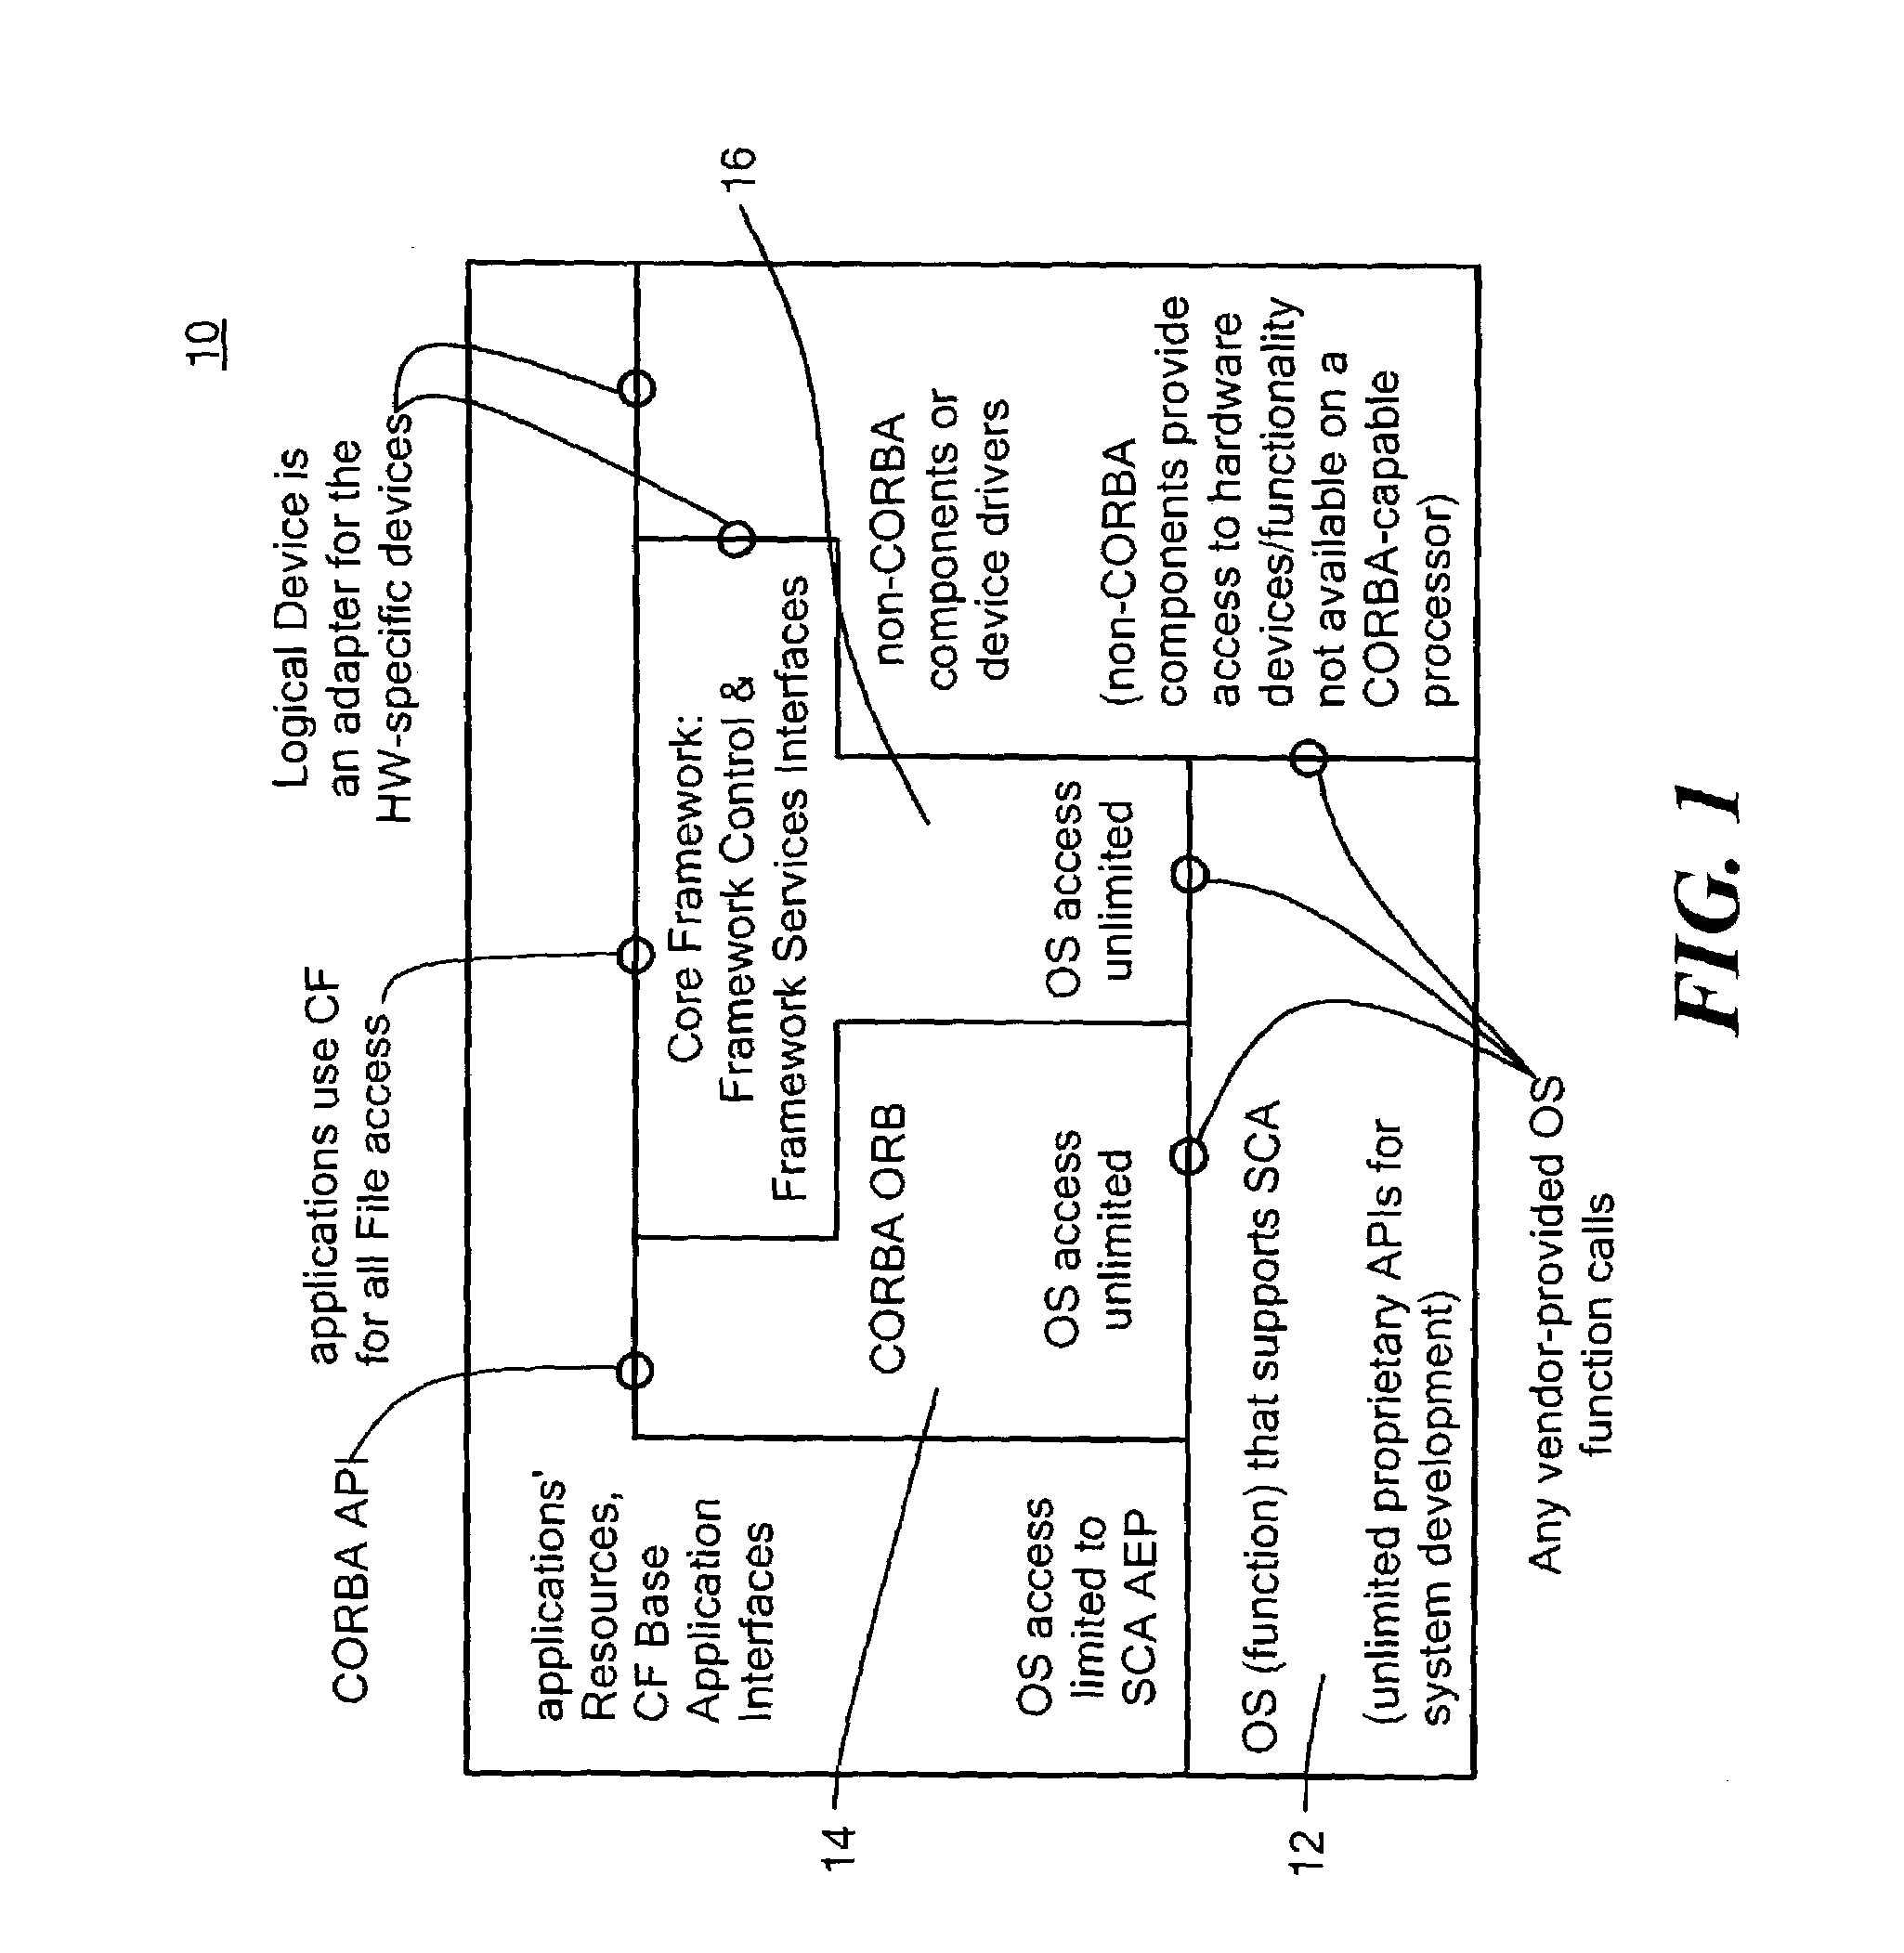 Executable radio software system and method